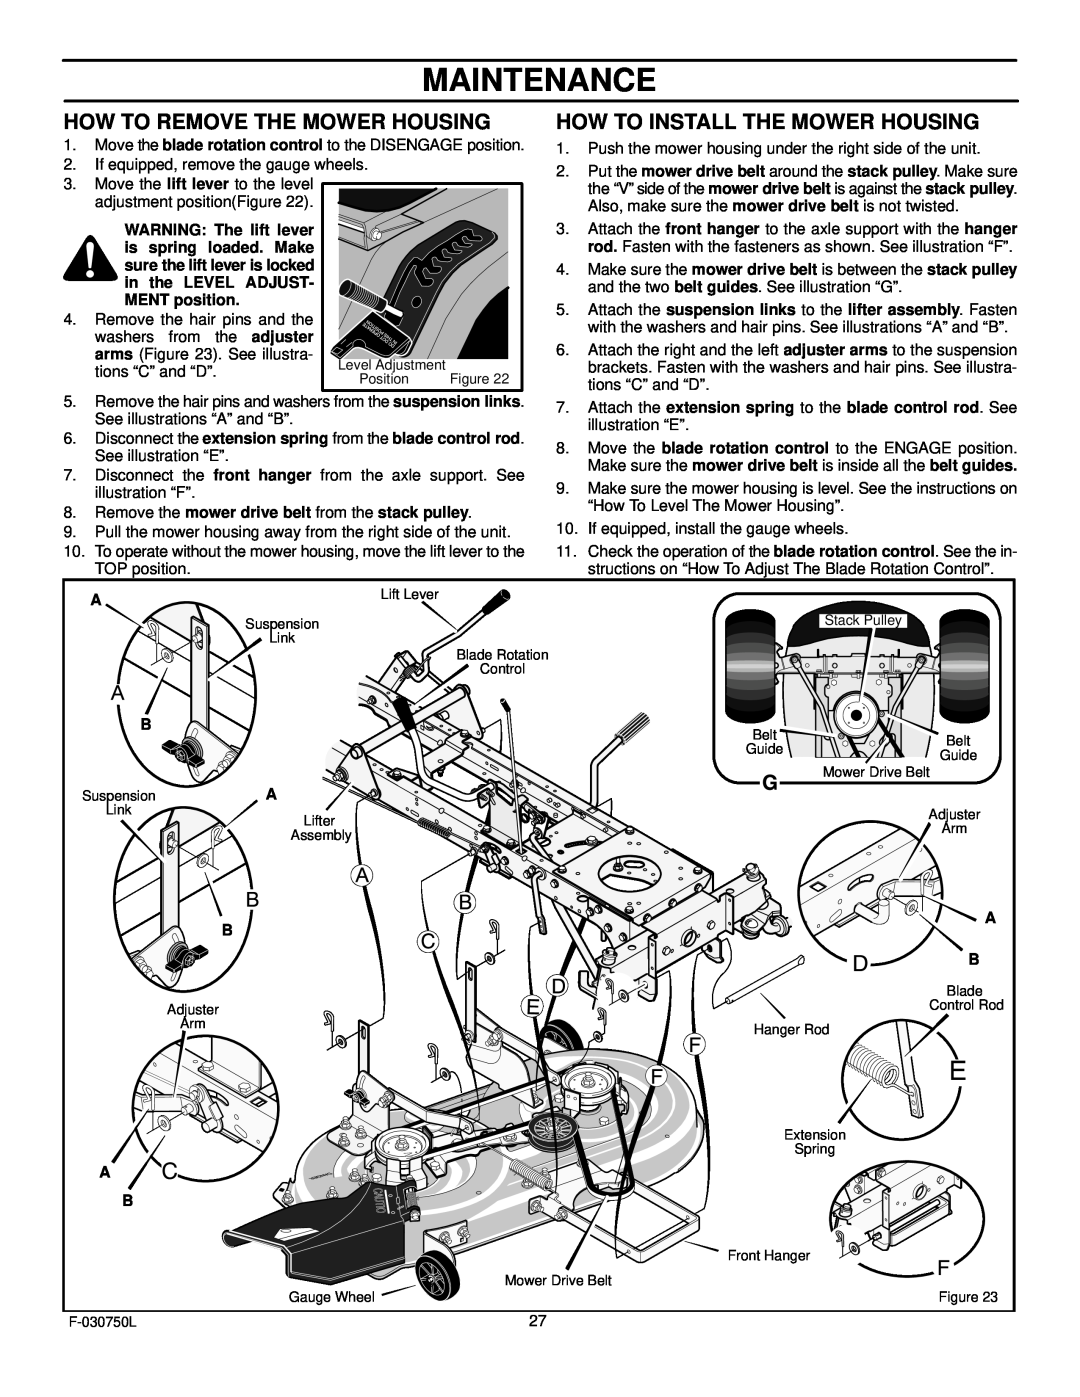 Murray 425306x48A manual Maintenance, How To Remove The Mower Housing, How To Install The Mower Housing 